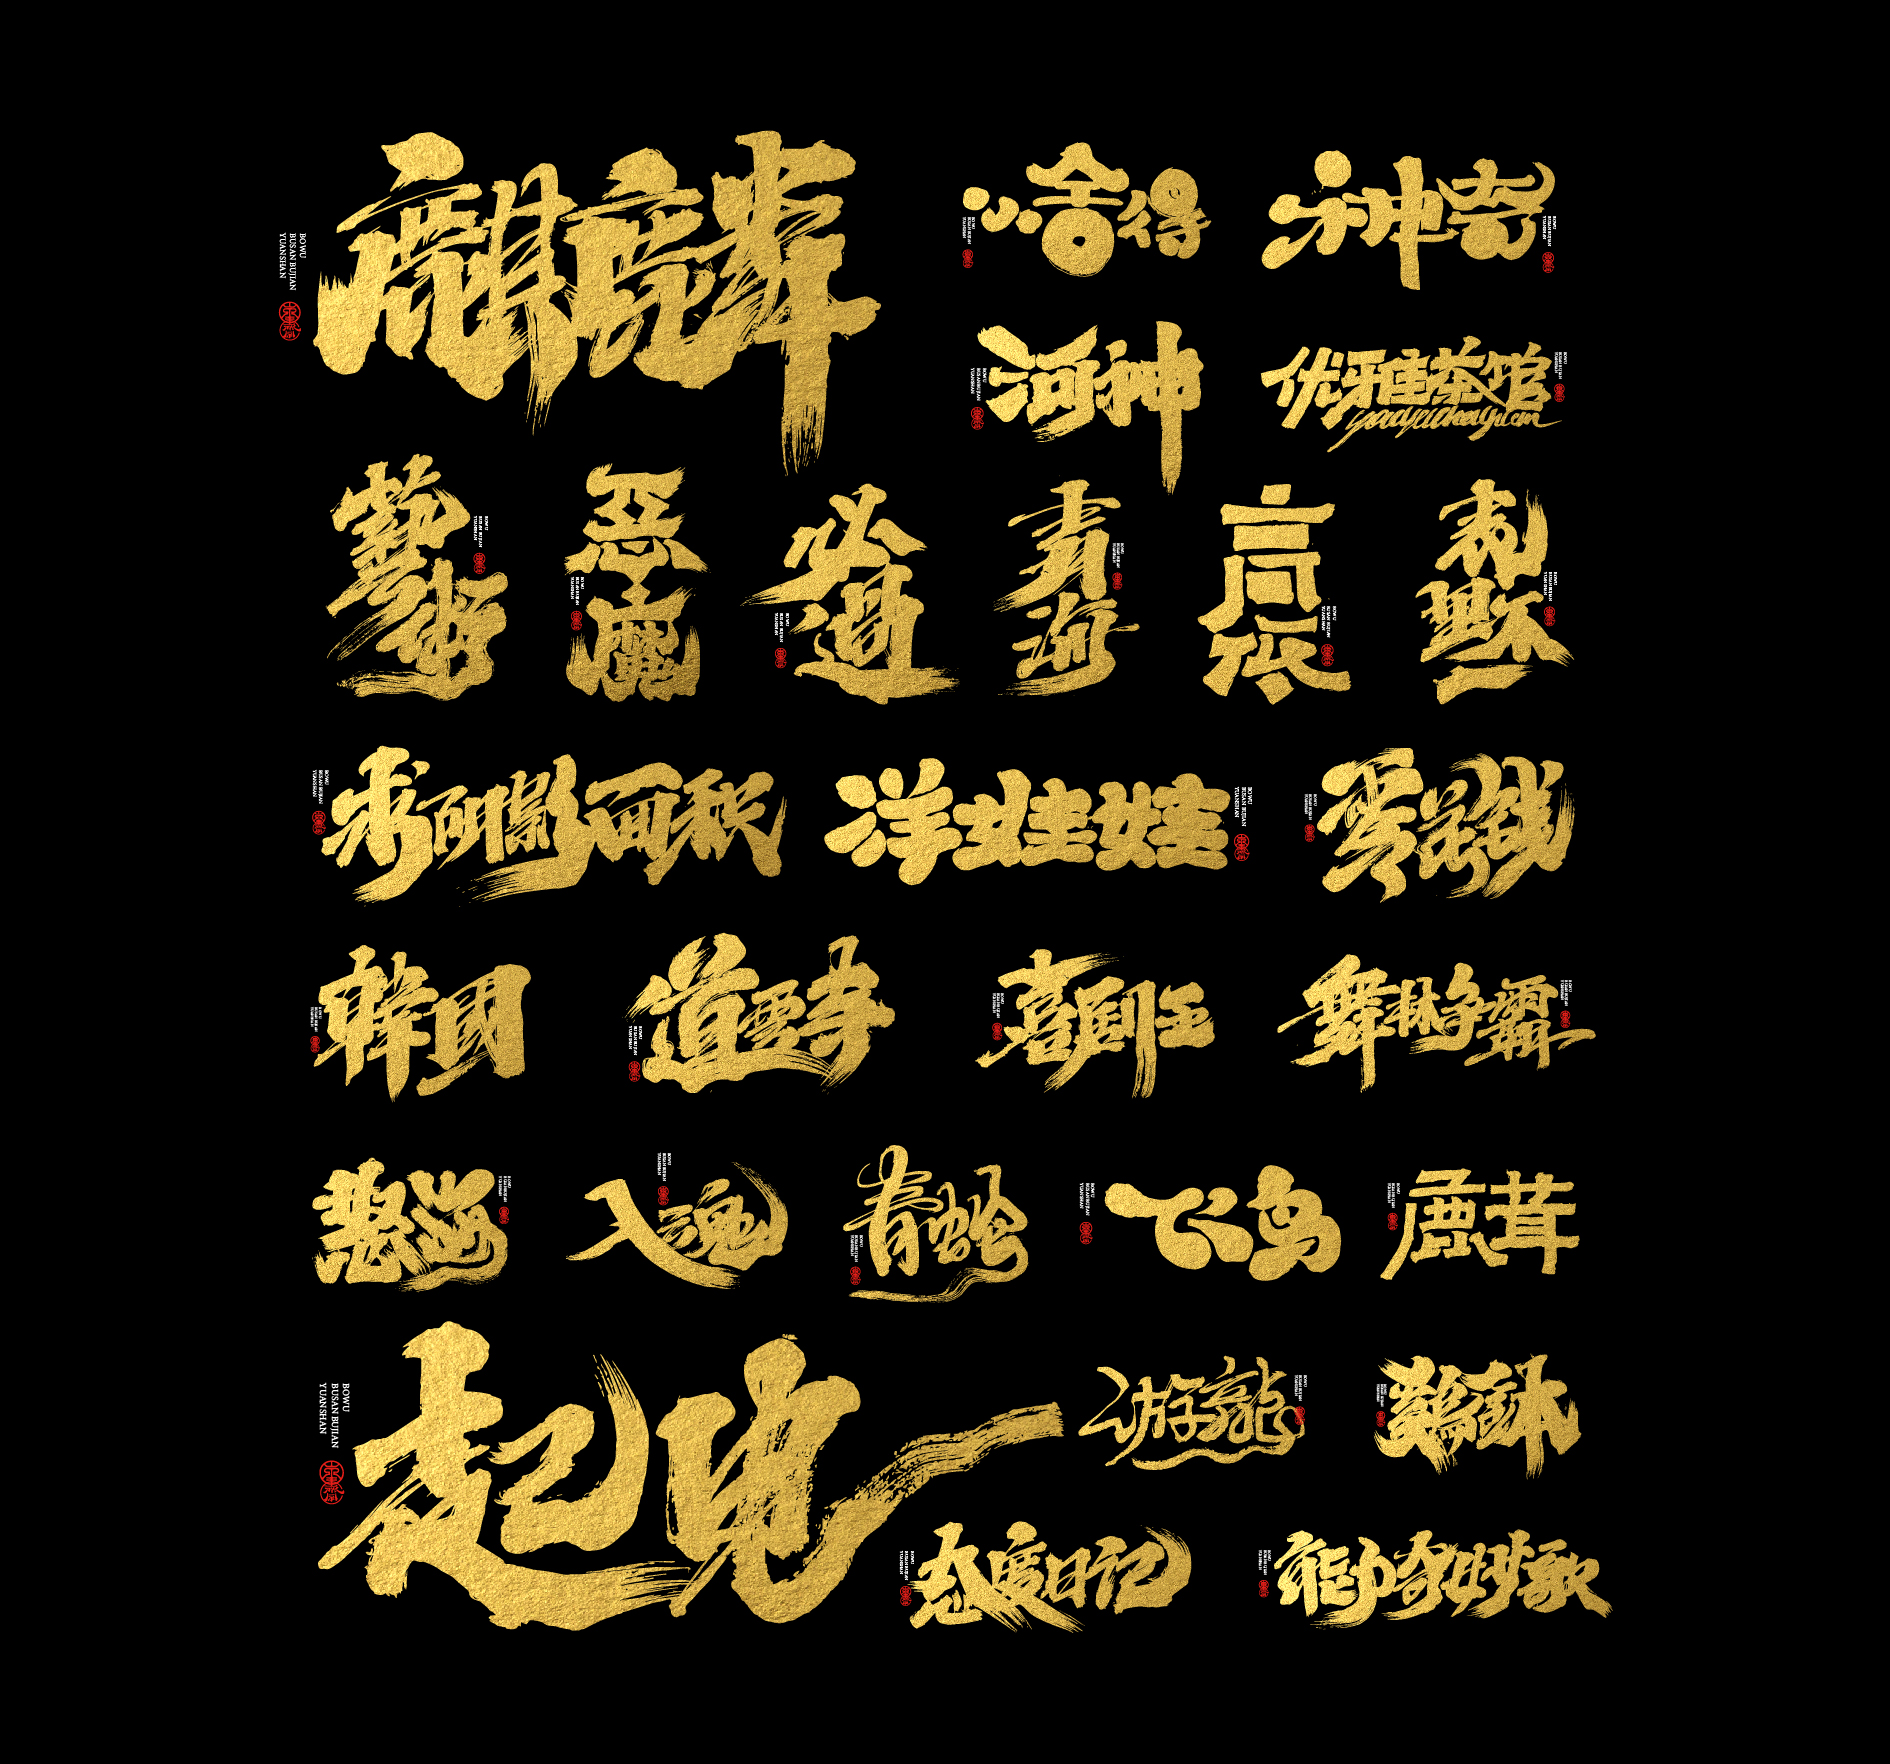 29P Collection of the latest Chinese font design schemes in 2021 #.16